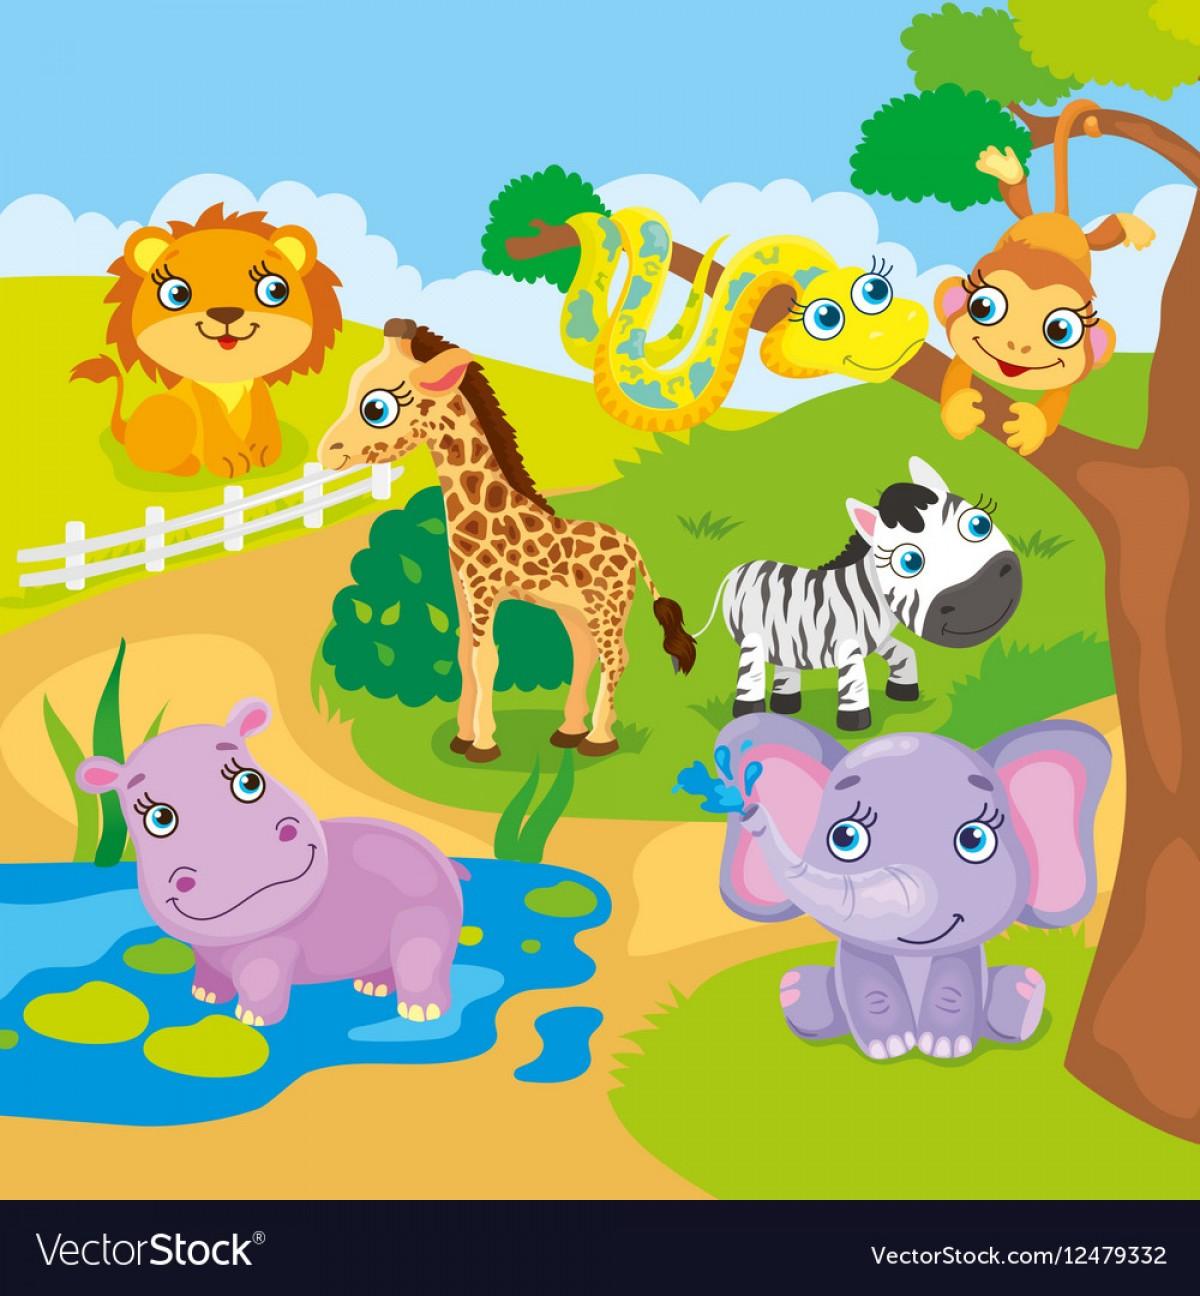 HD Animated Zoo Animals Vector Pictures